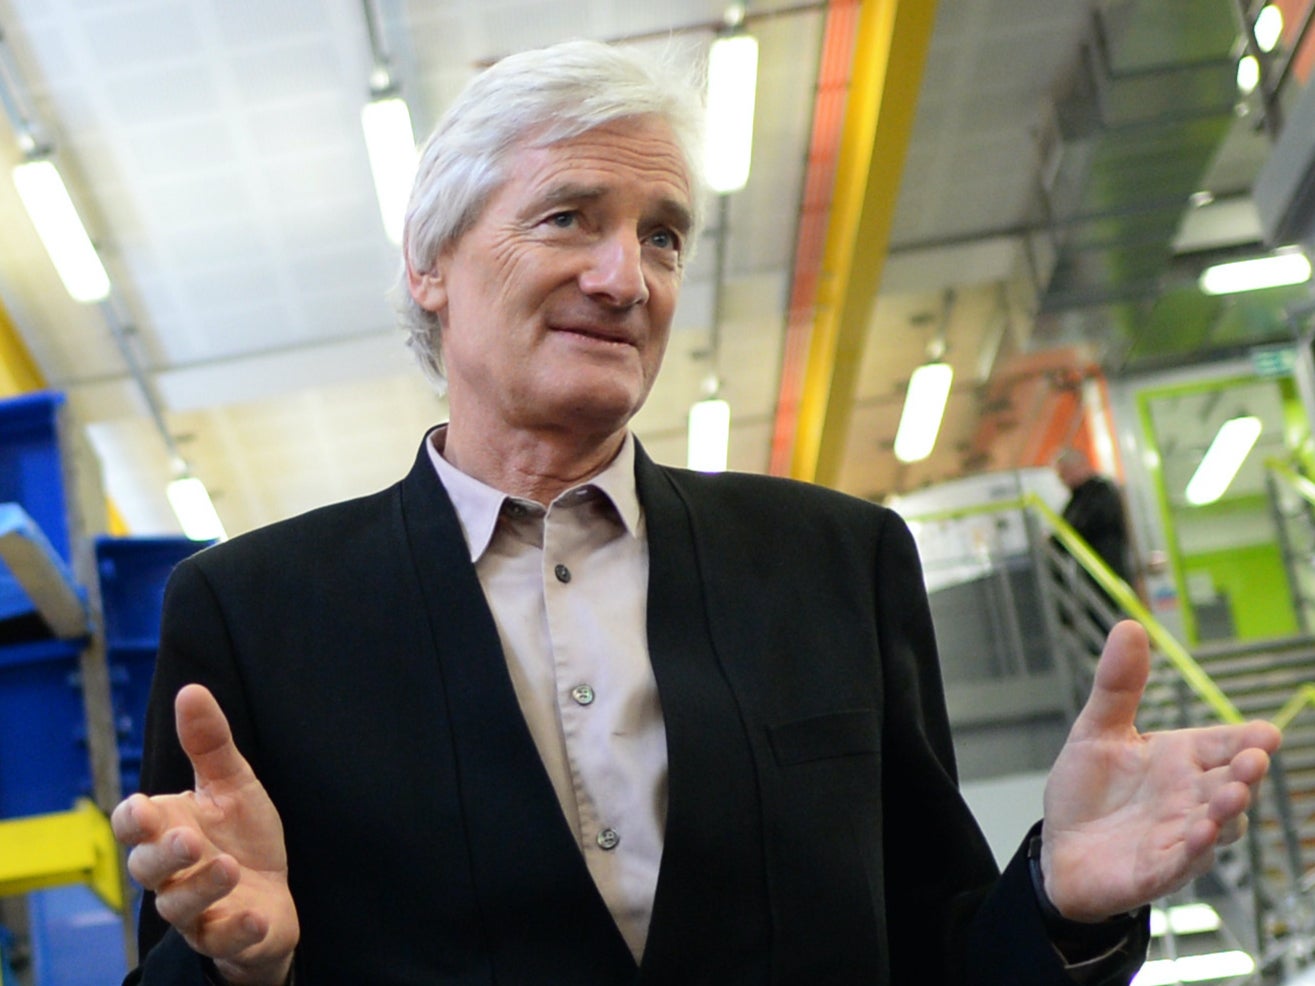 Entrepreneur Sir James Dyson pictured on 23 March, 2015.